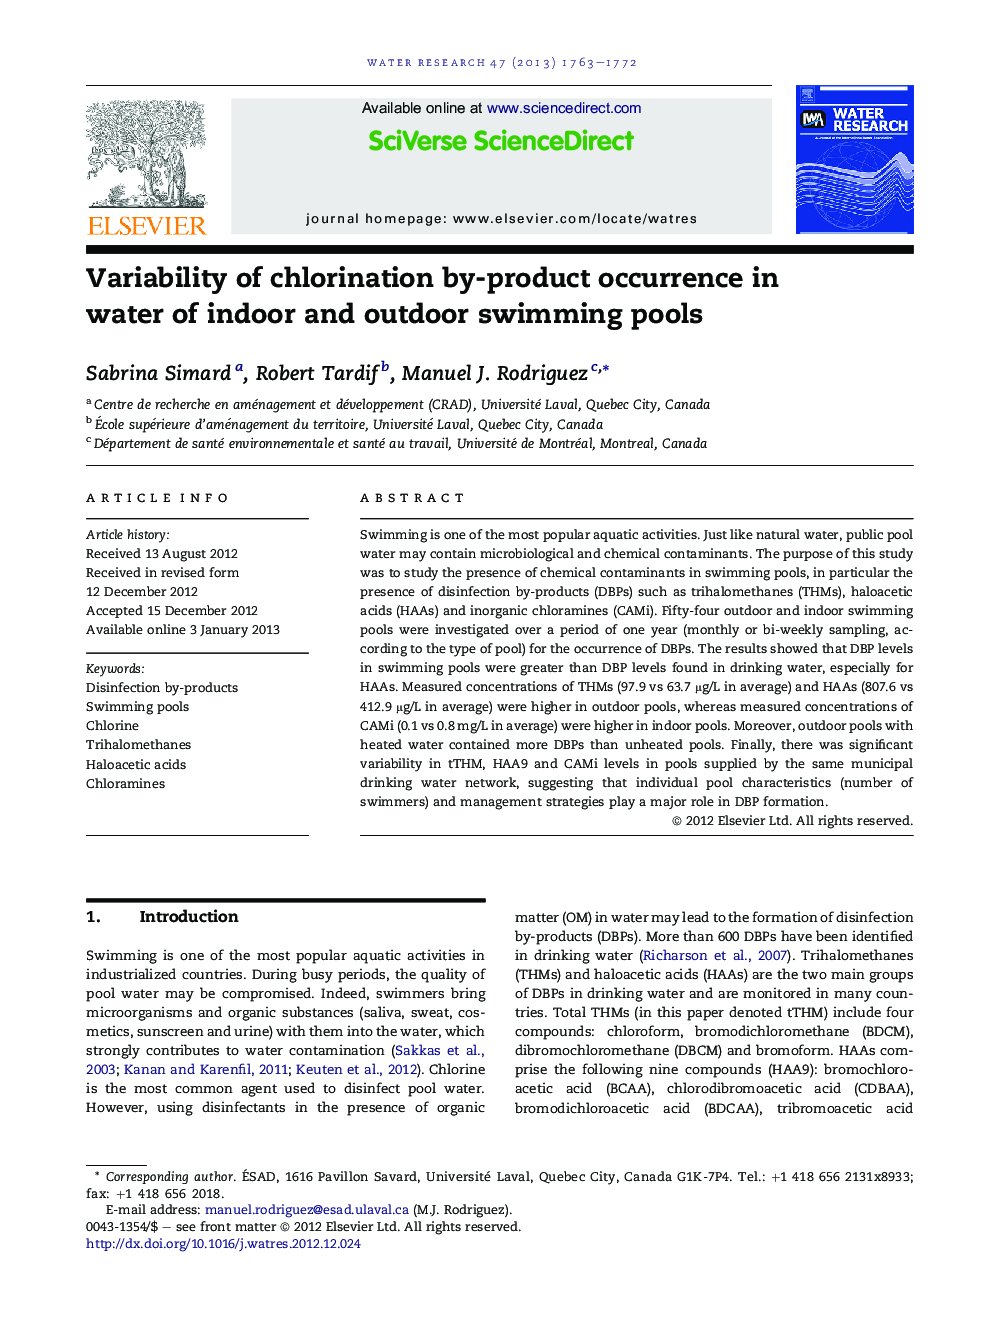 Variability of chlorination by-product occurrence in water of indoor and outdoor swimming pools